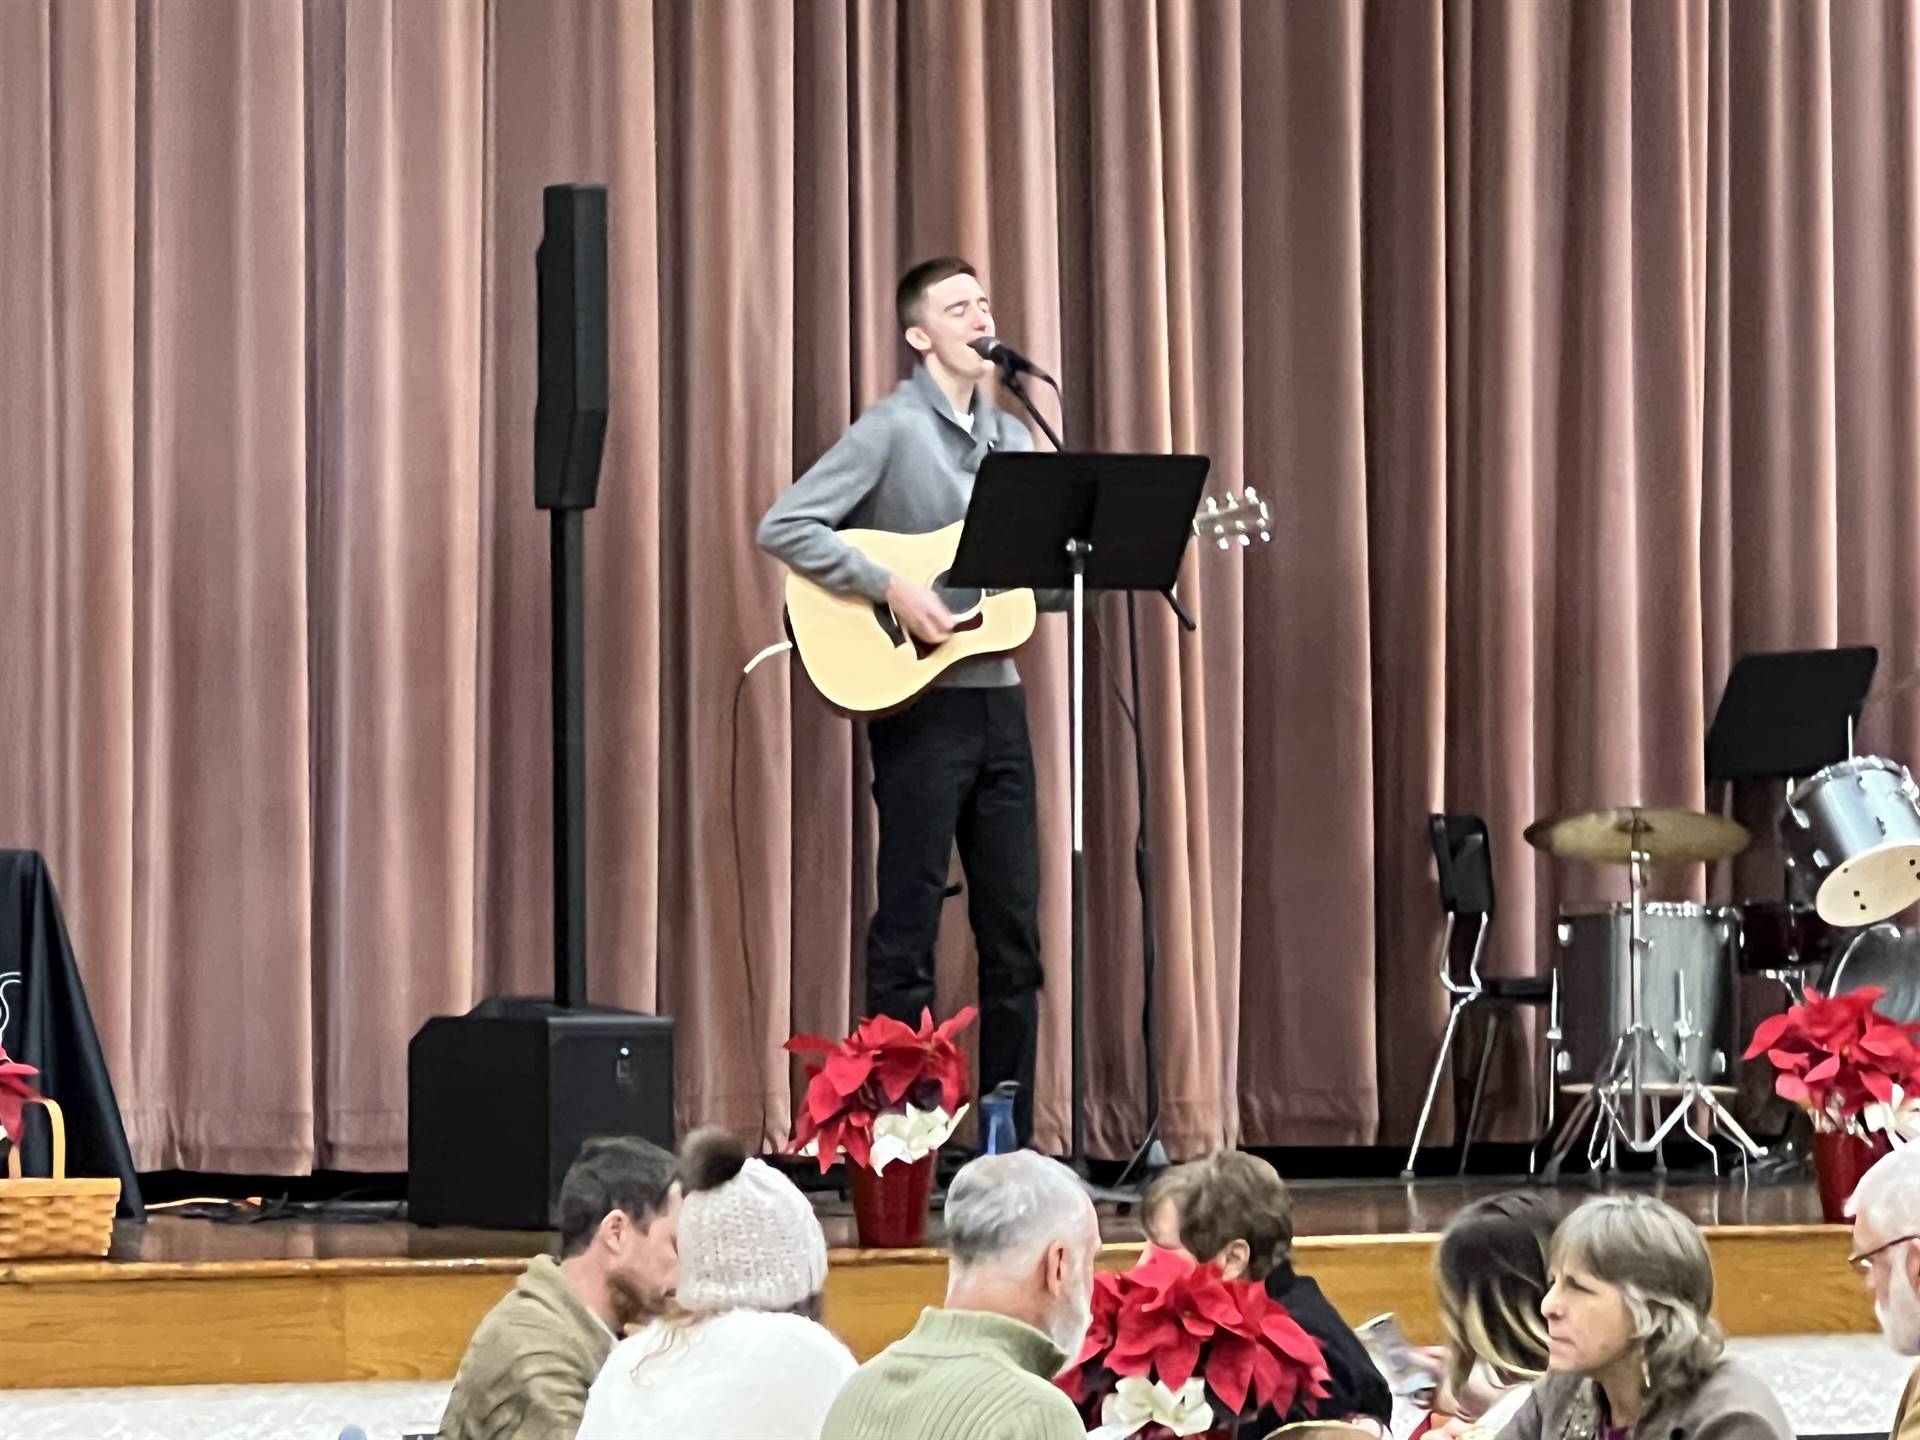 Sam Rupe performing at the Chamber of Commerce Banquet